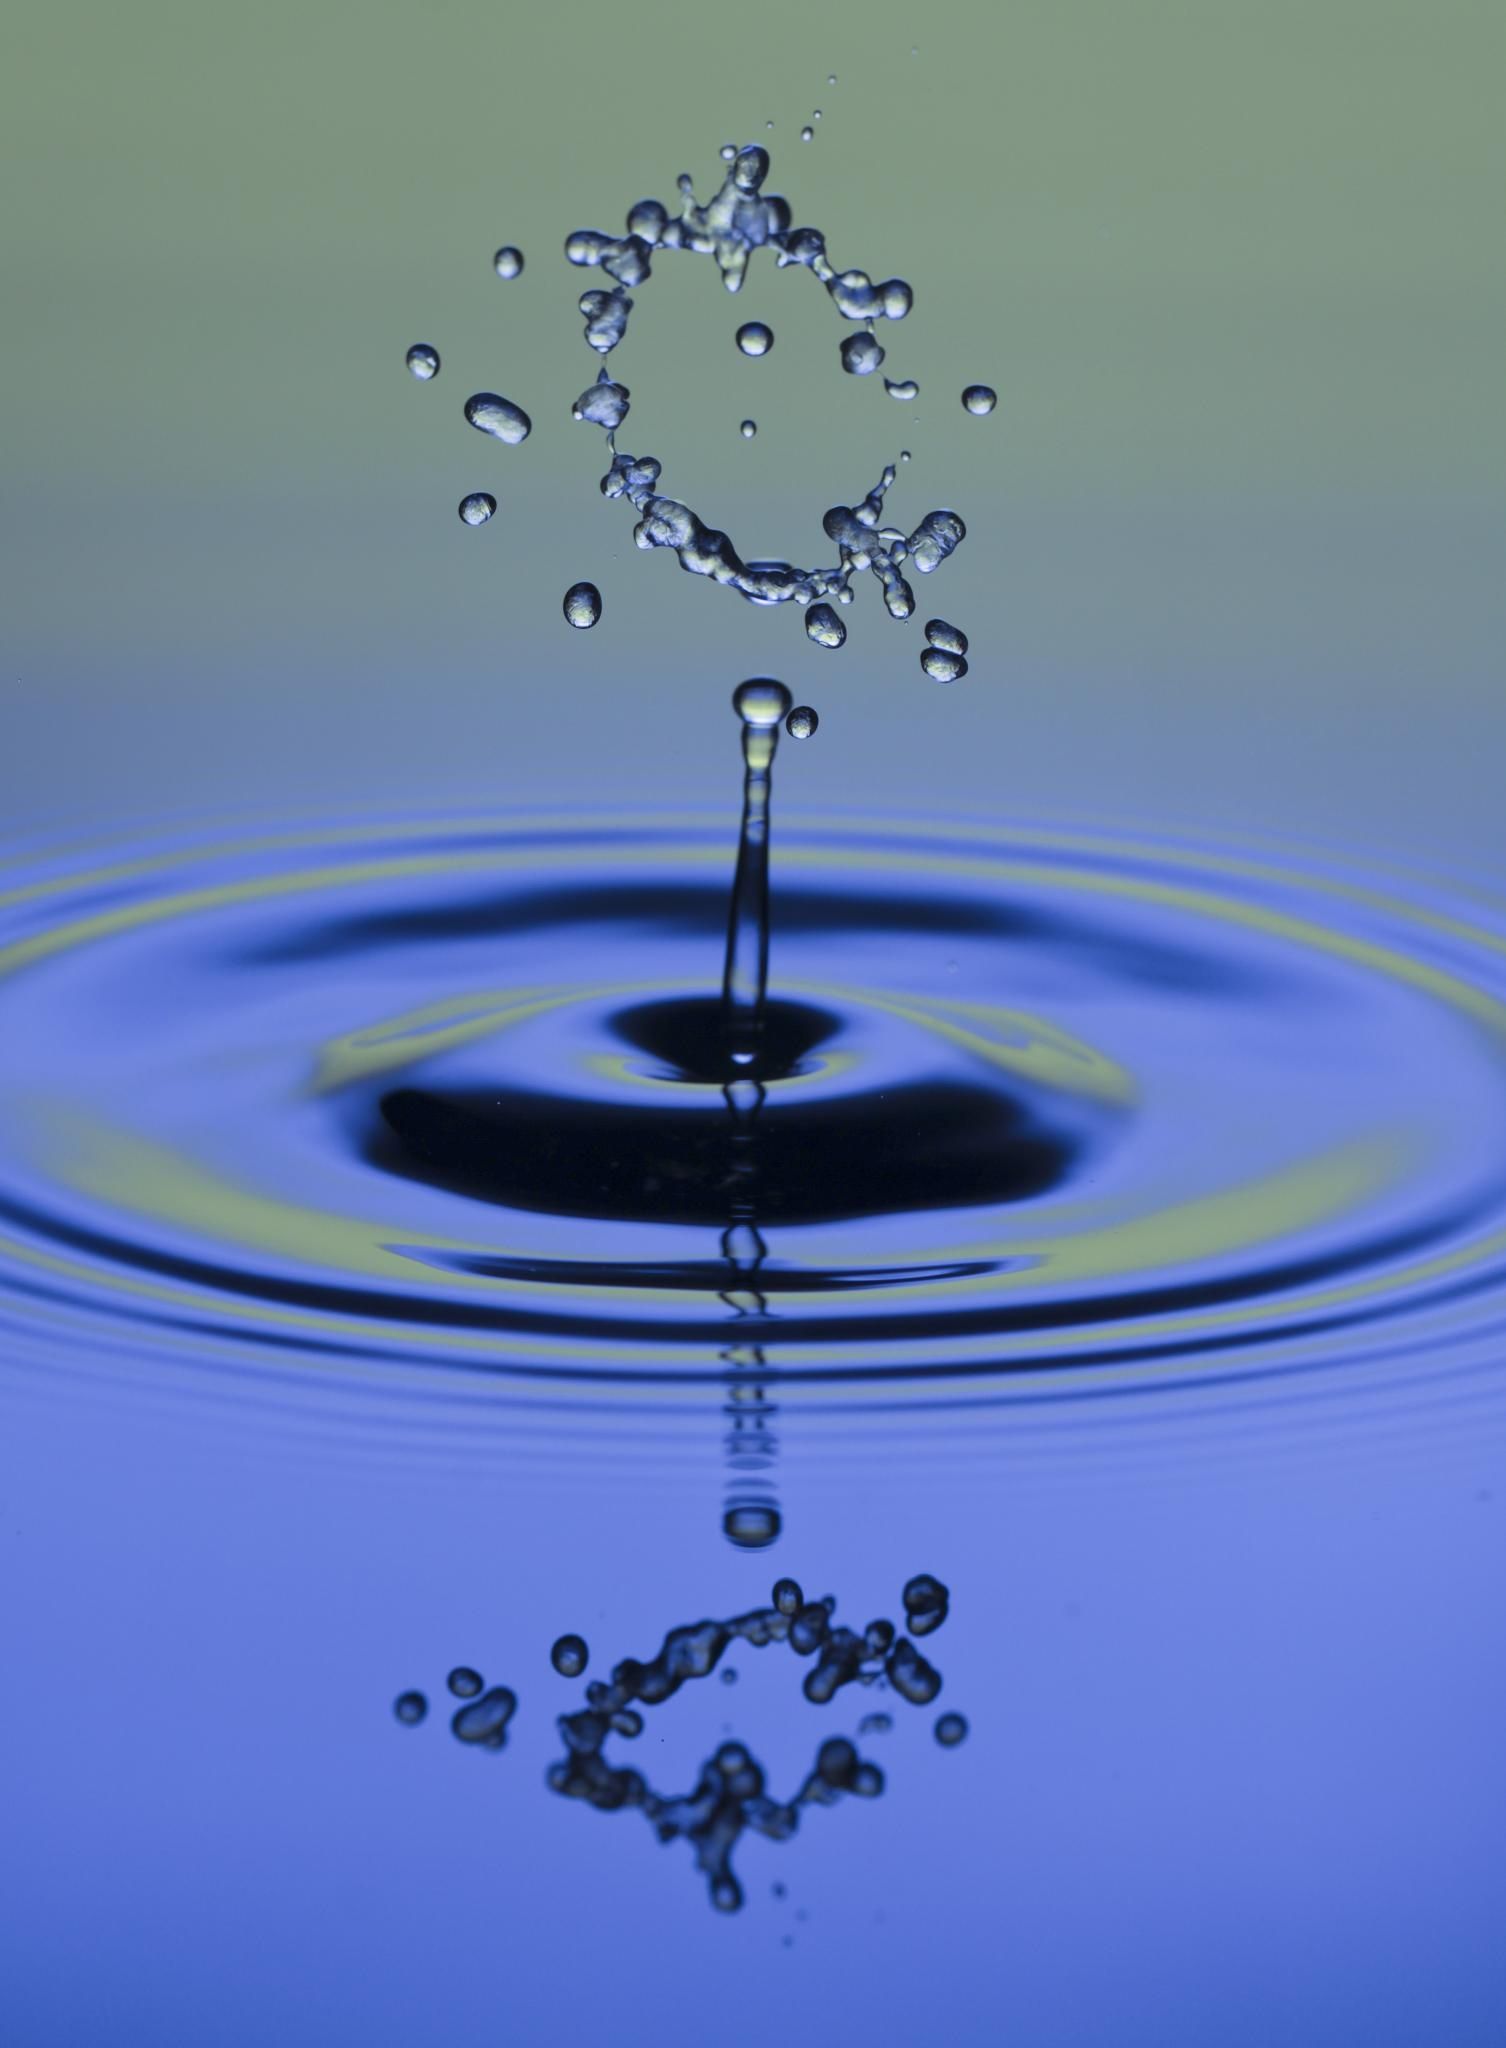 A water drop splashing into the air - Water